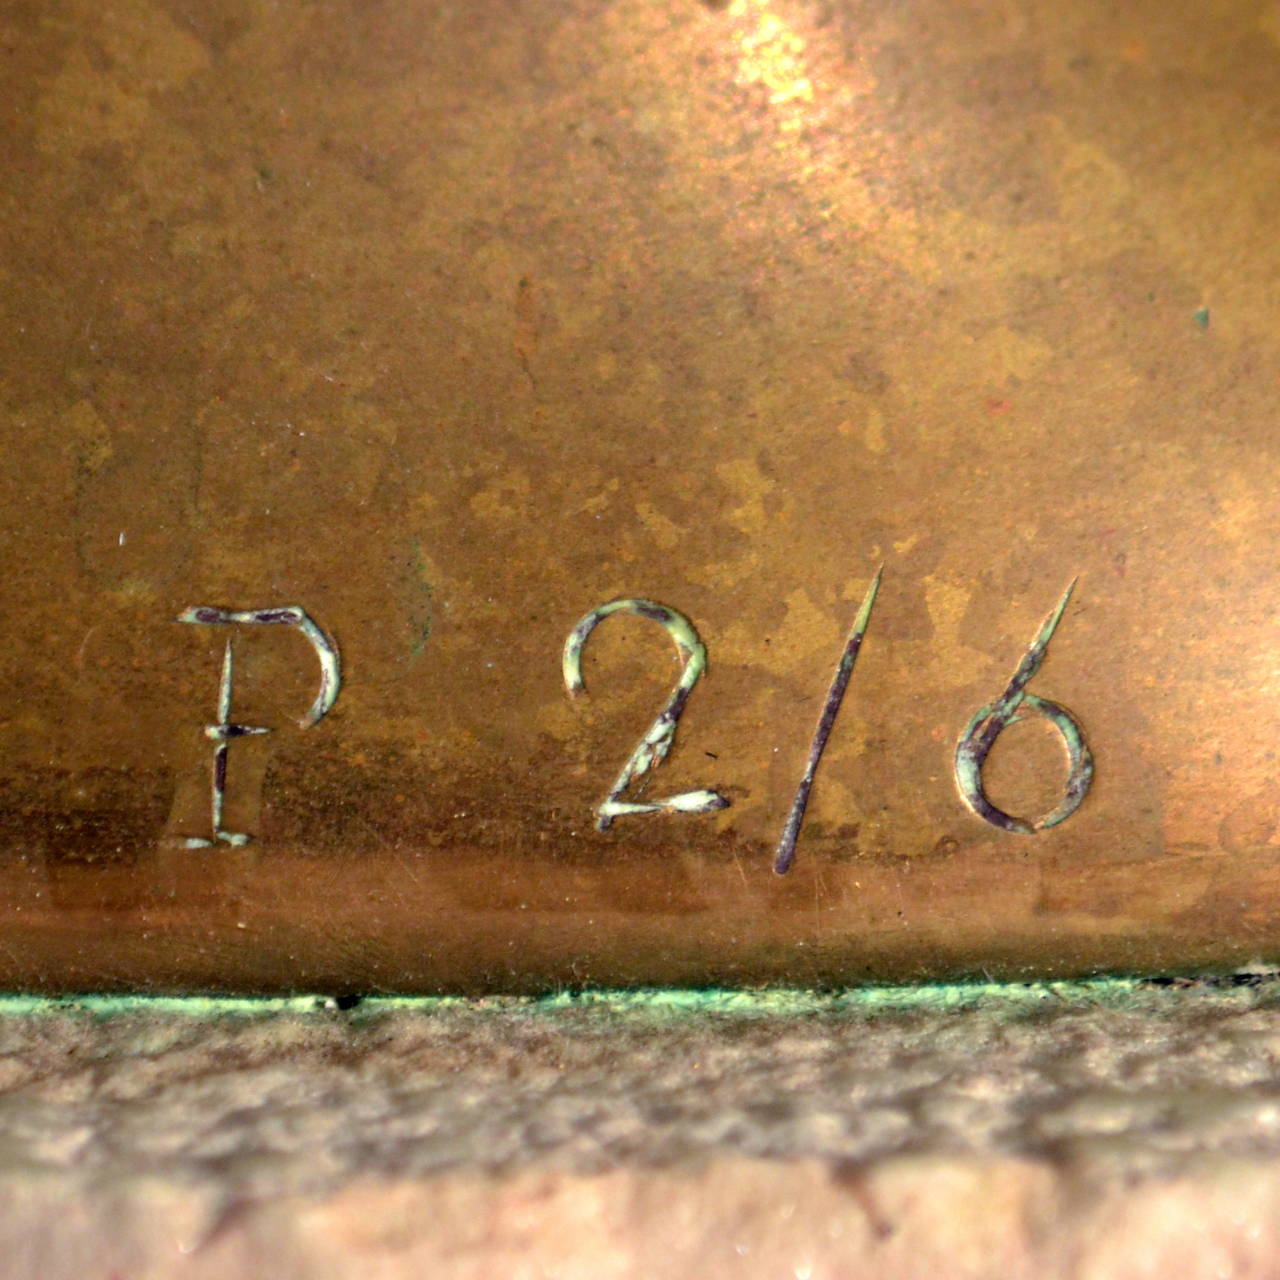 Cast bronze
Initialed and numbered 